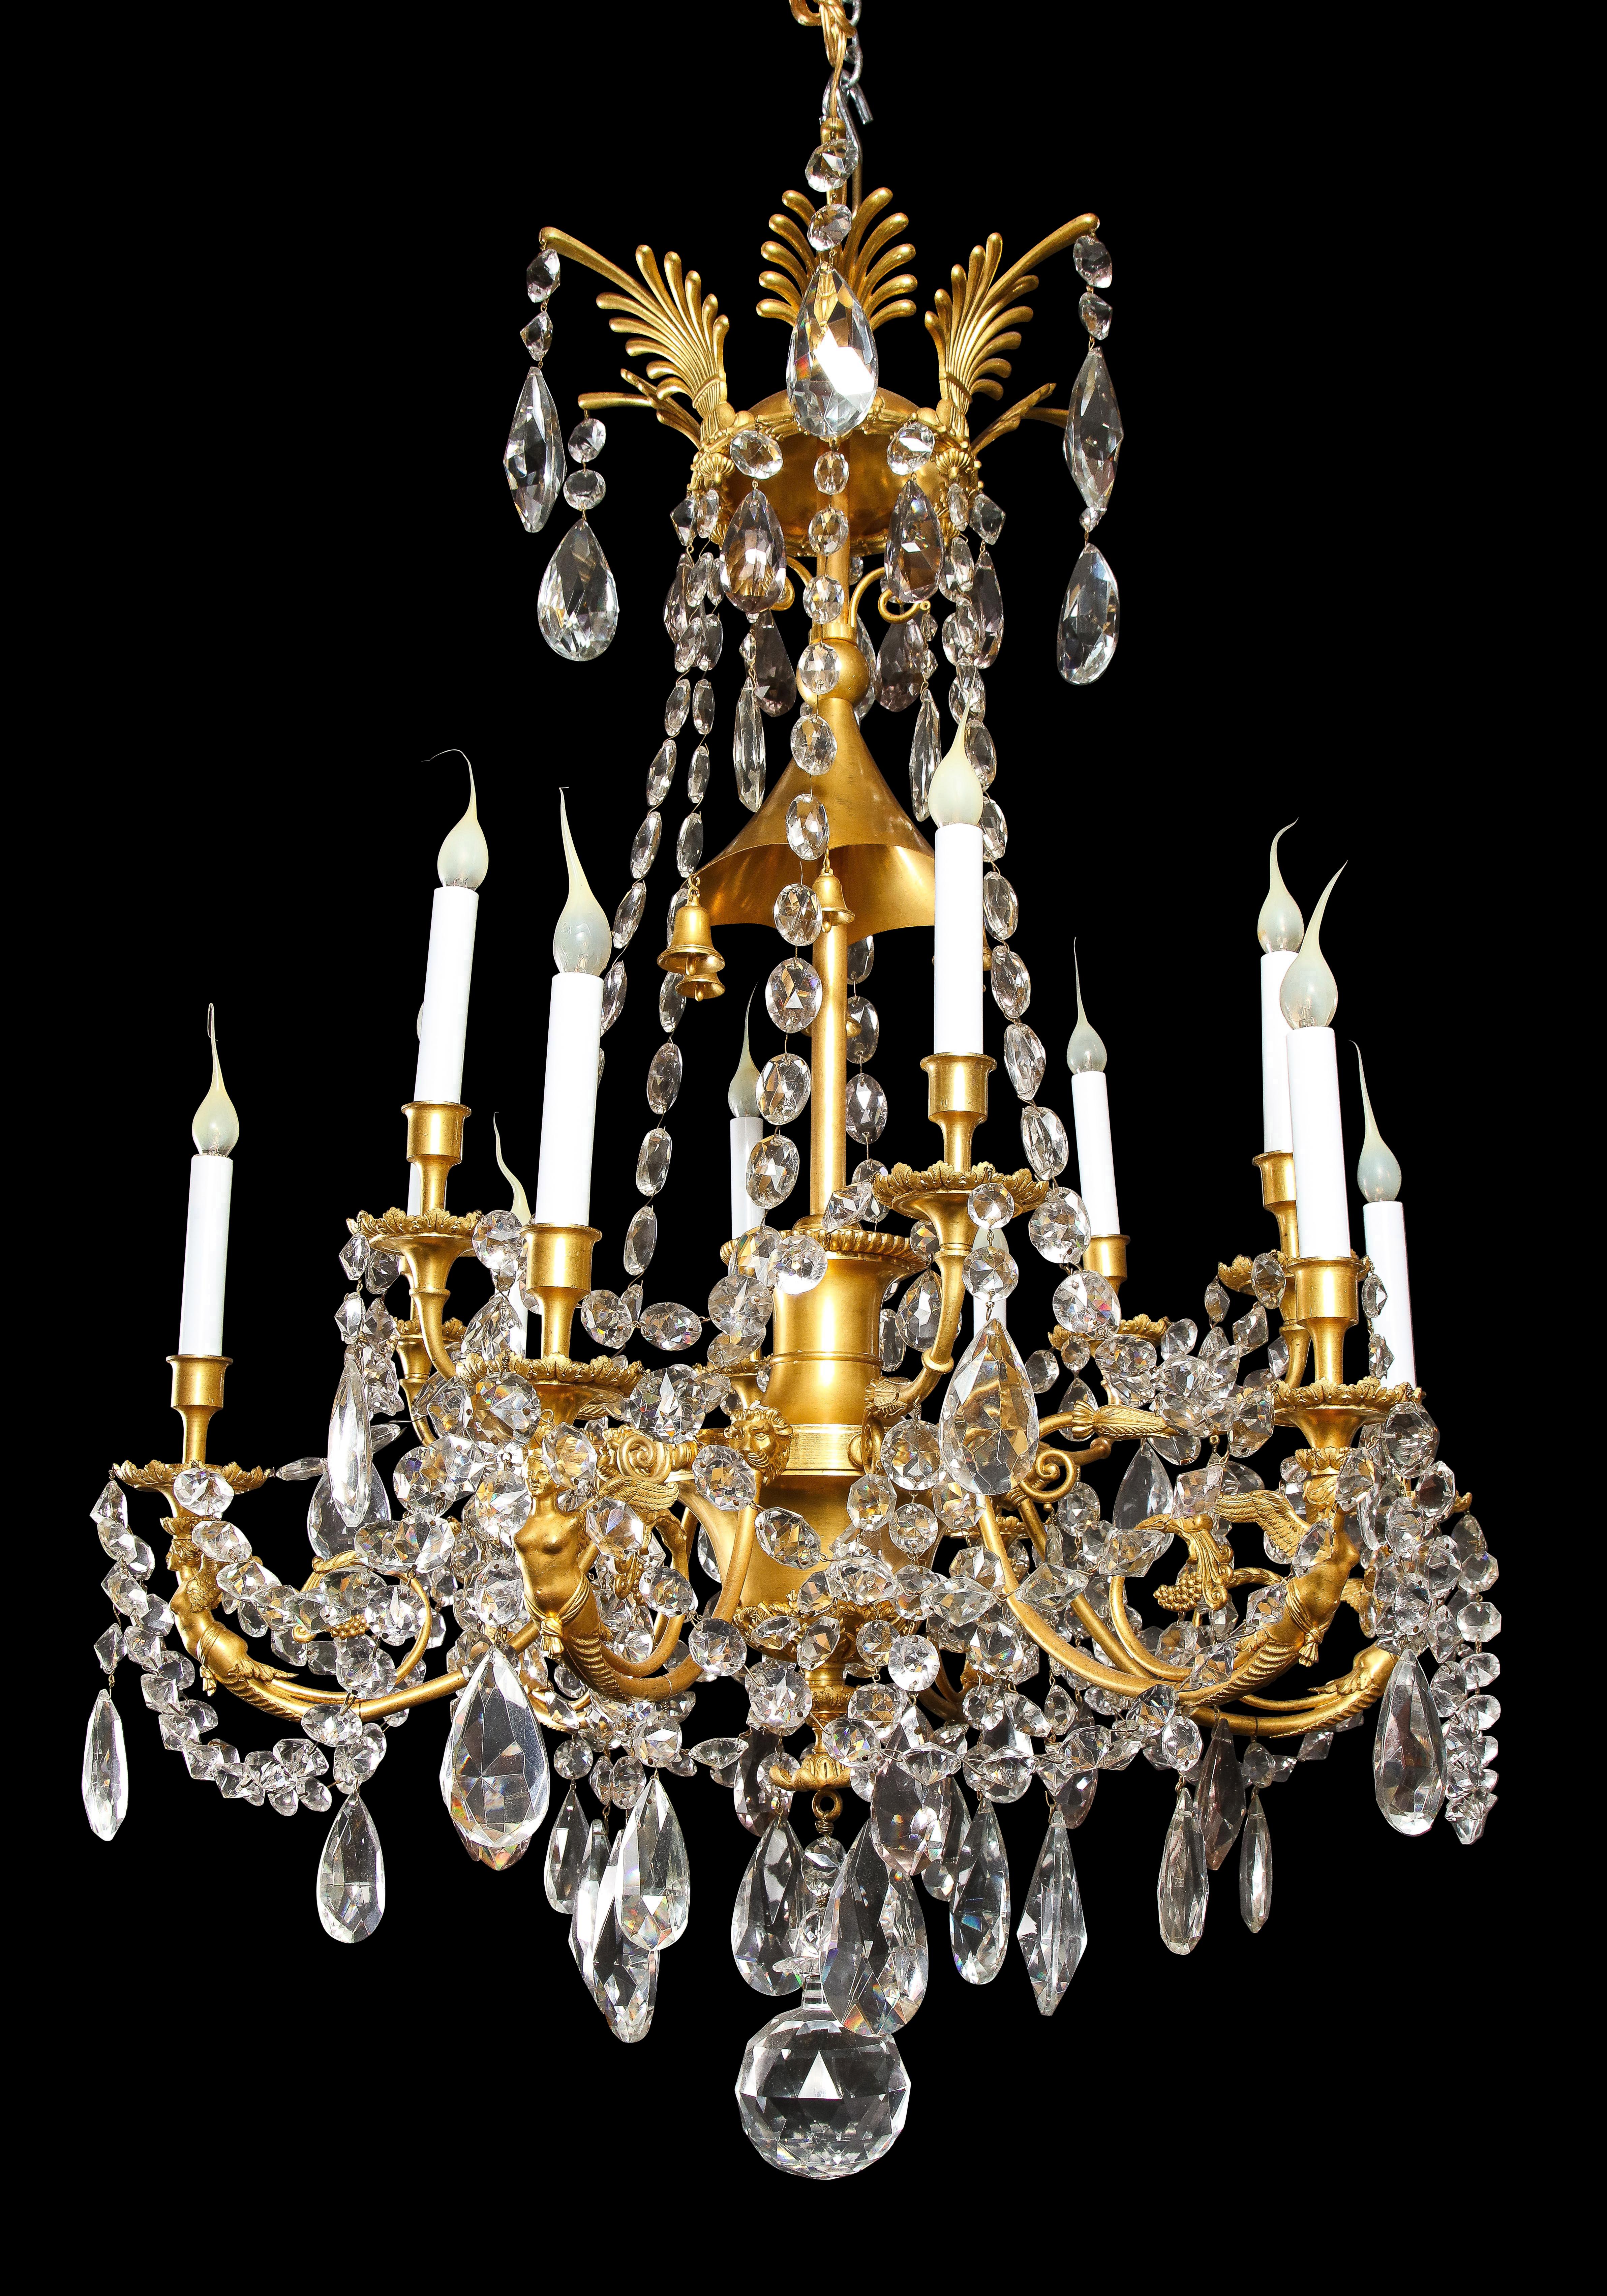 Spectacular Antique French Louis XVI Style Gilt Bronze and Crystal Chandelier In Good Condition For Sale In New York, NY